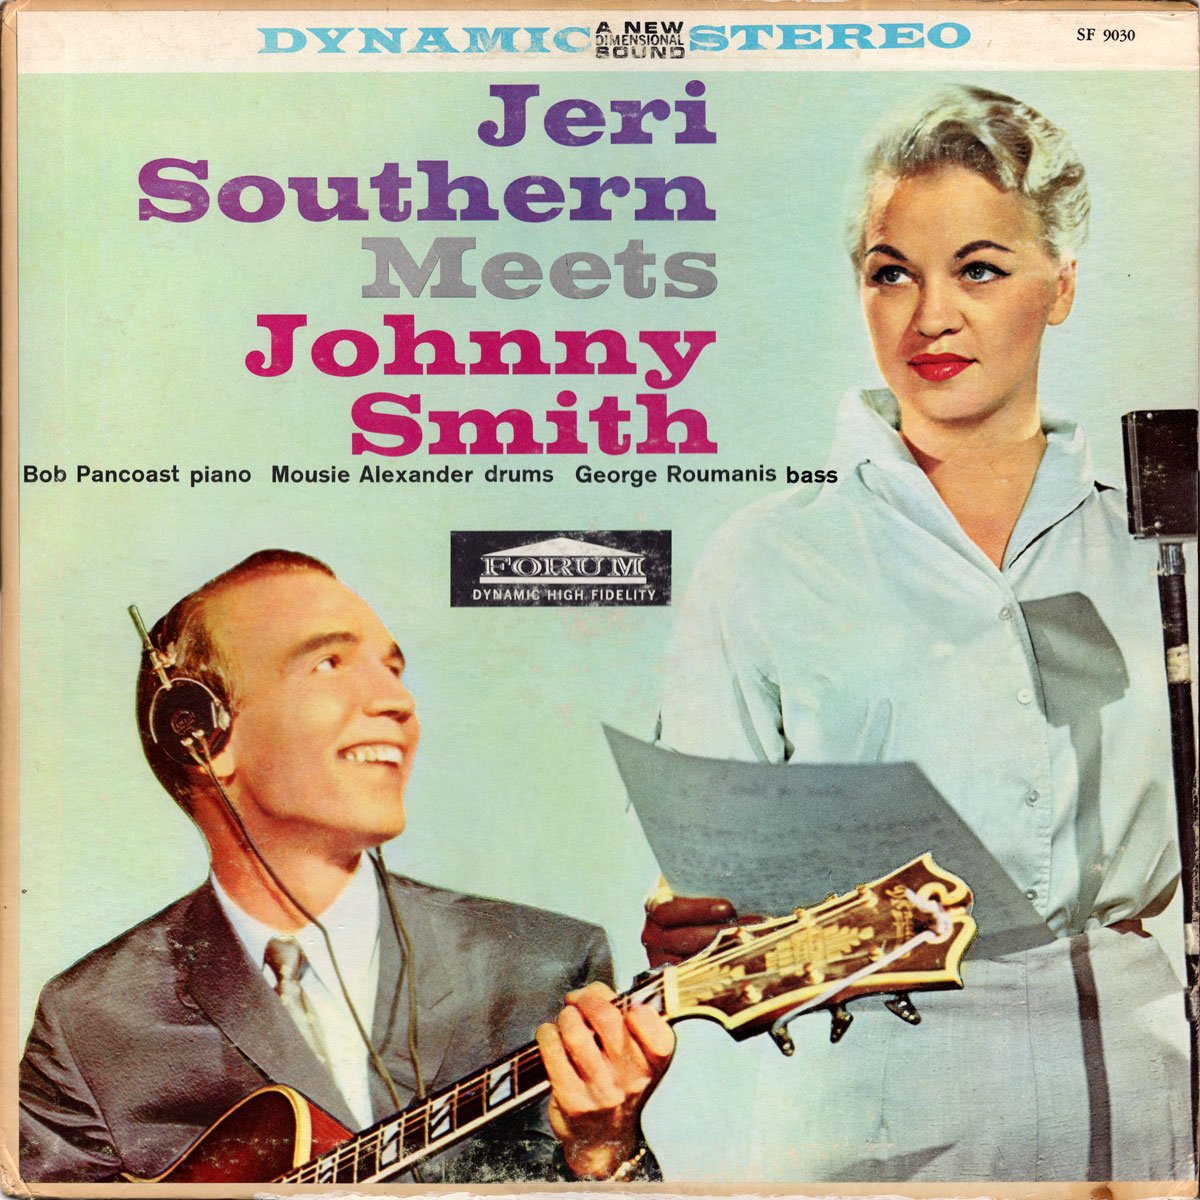 Jeri Southern Meets Johnny Smith - Front cover